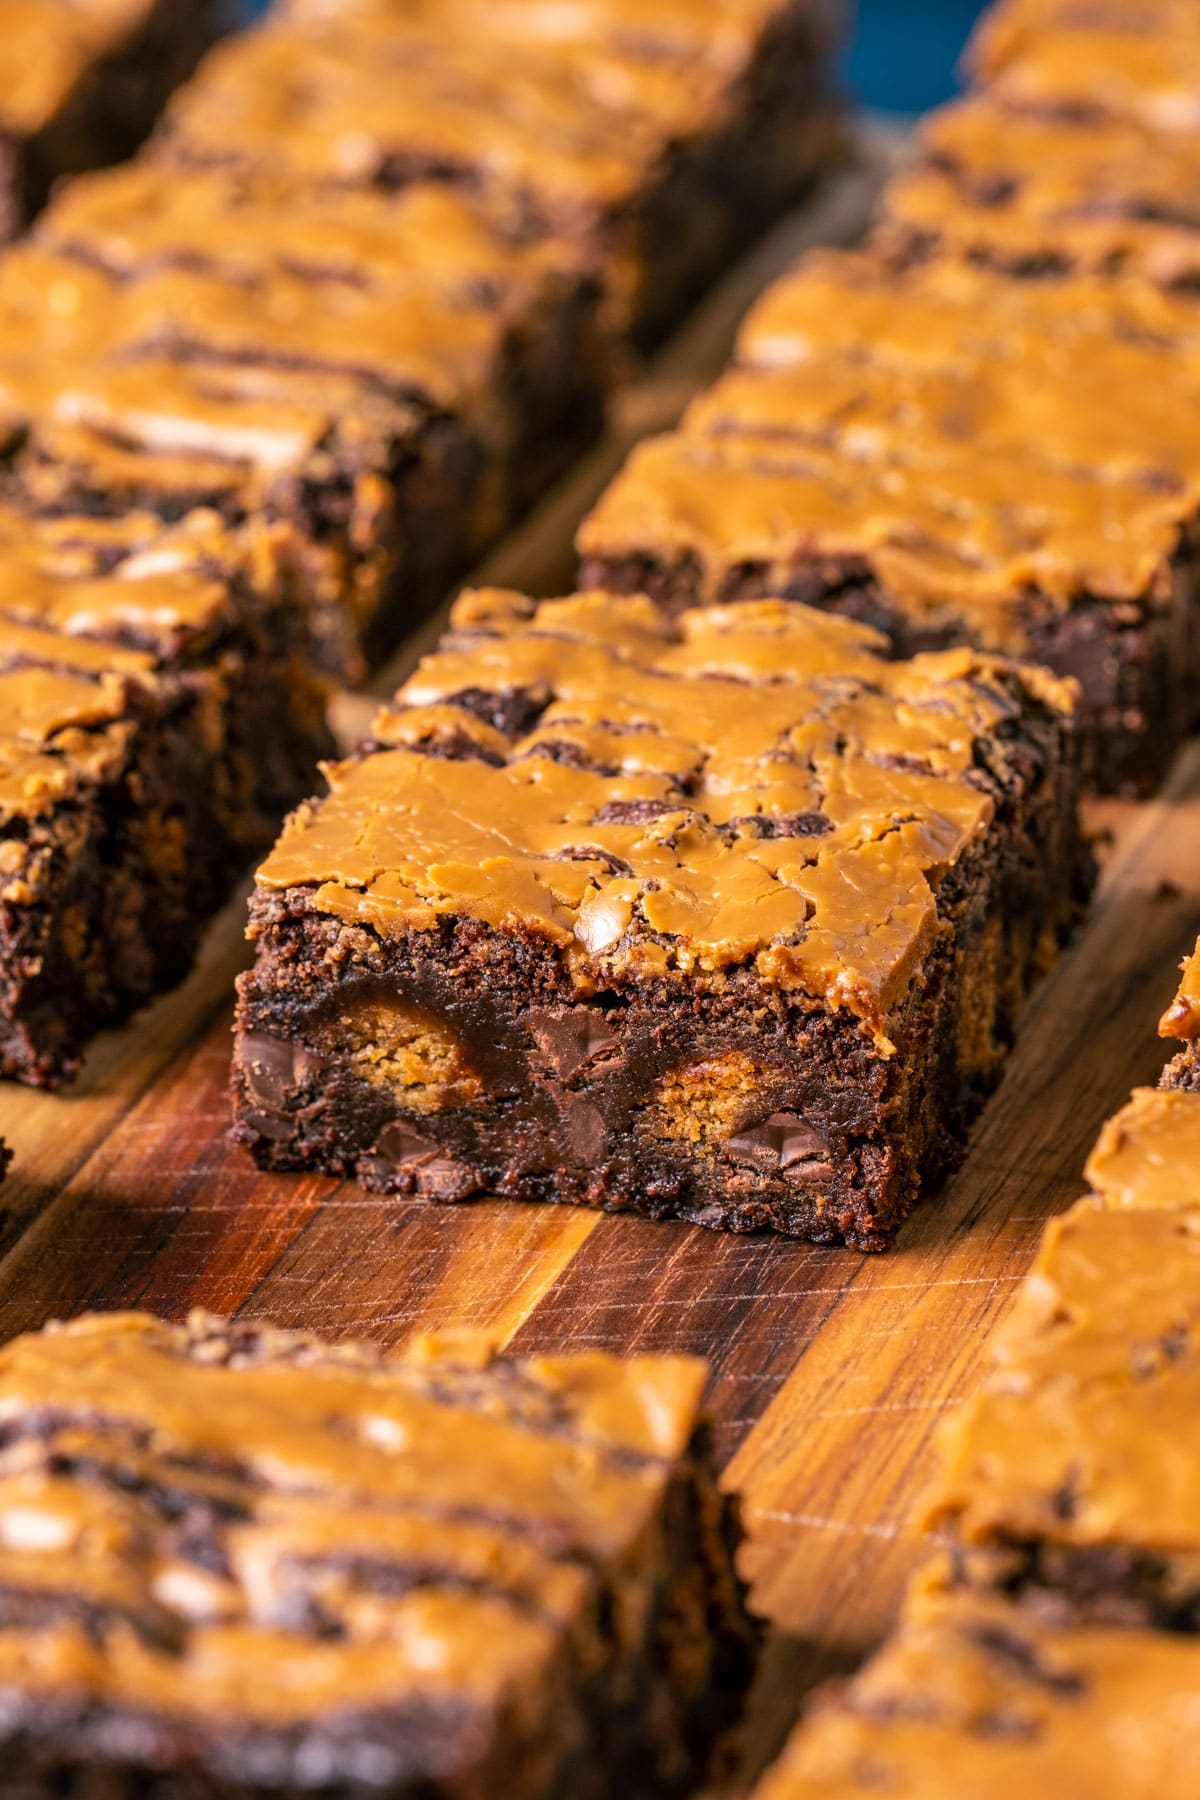 Vegan biscoff brownies sliced into squares on a wooden board.